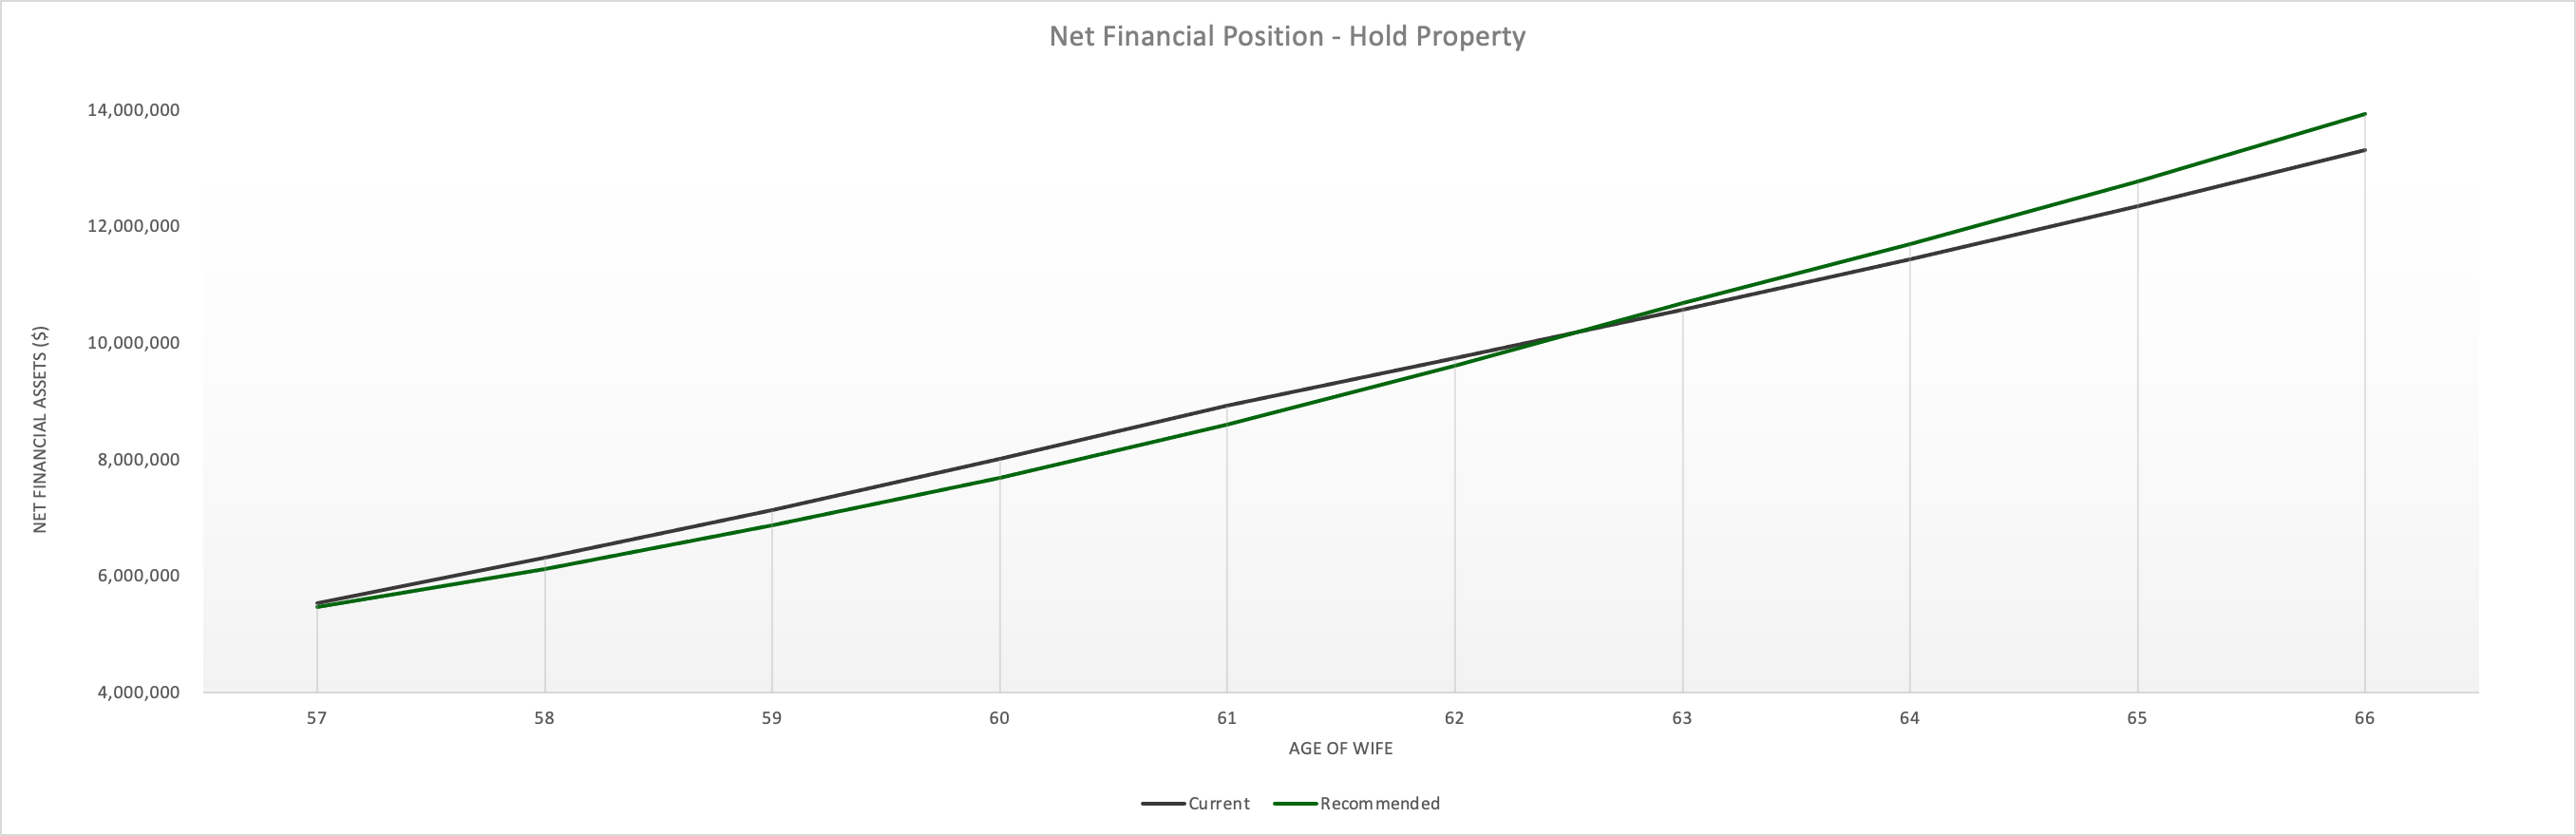 Net Financial Position - Hold Property